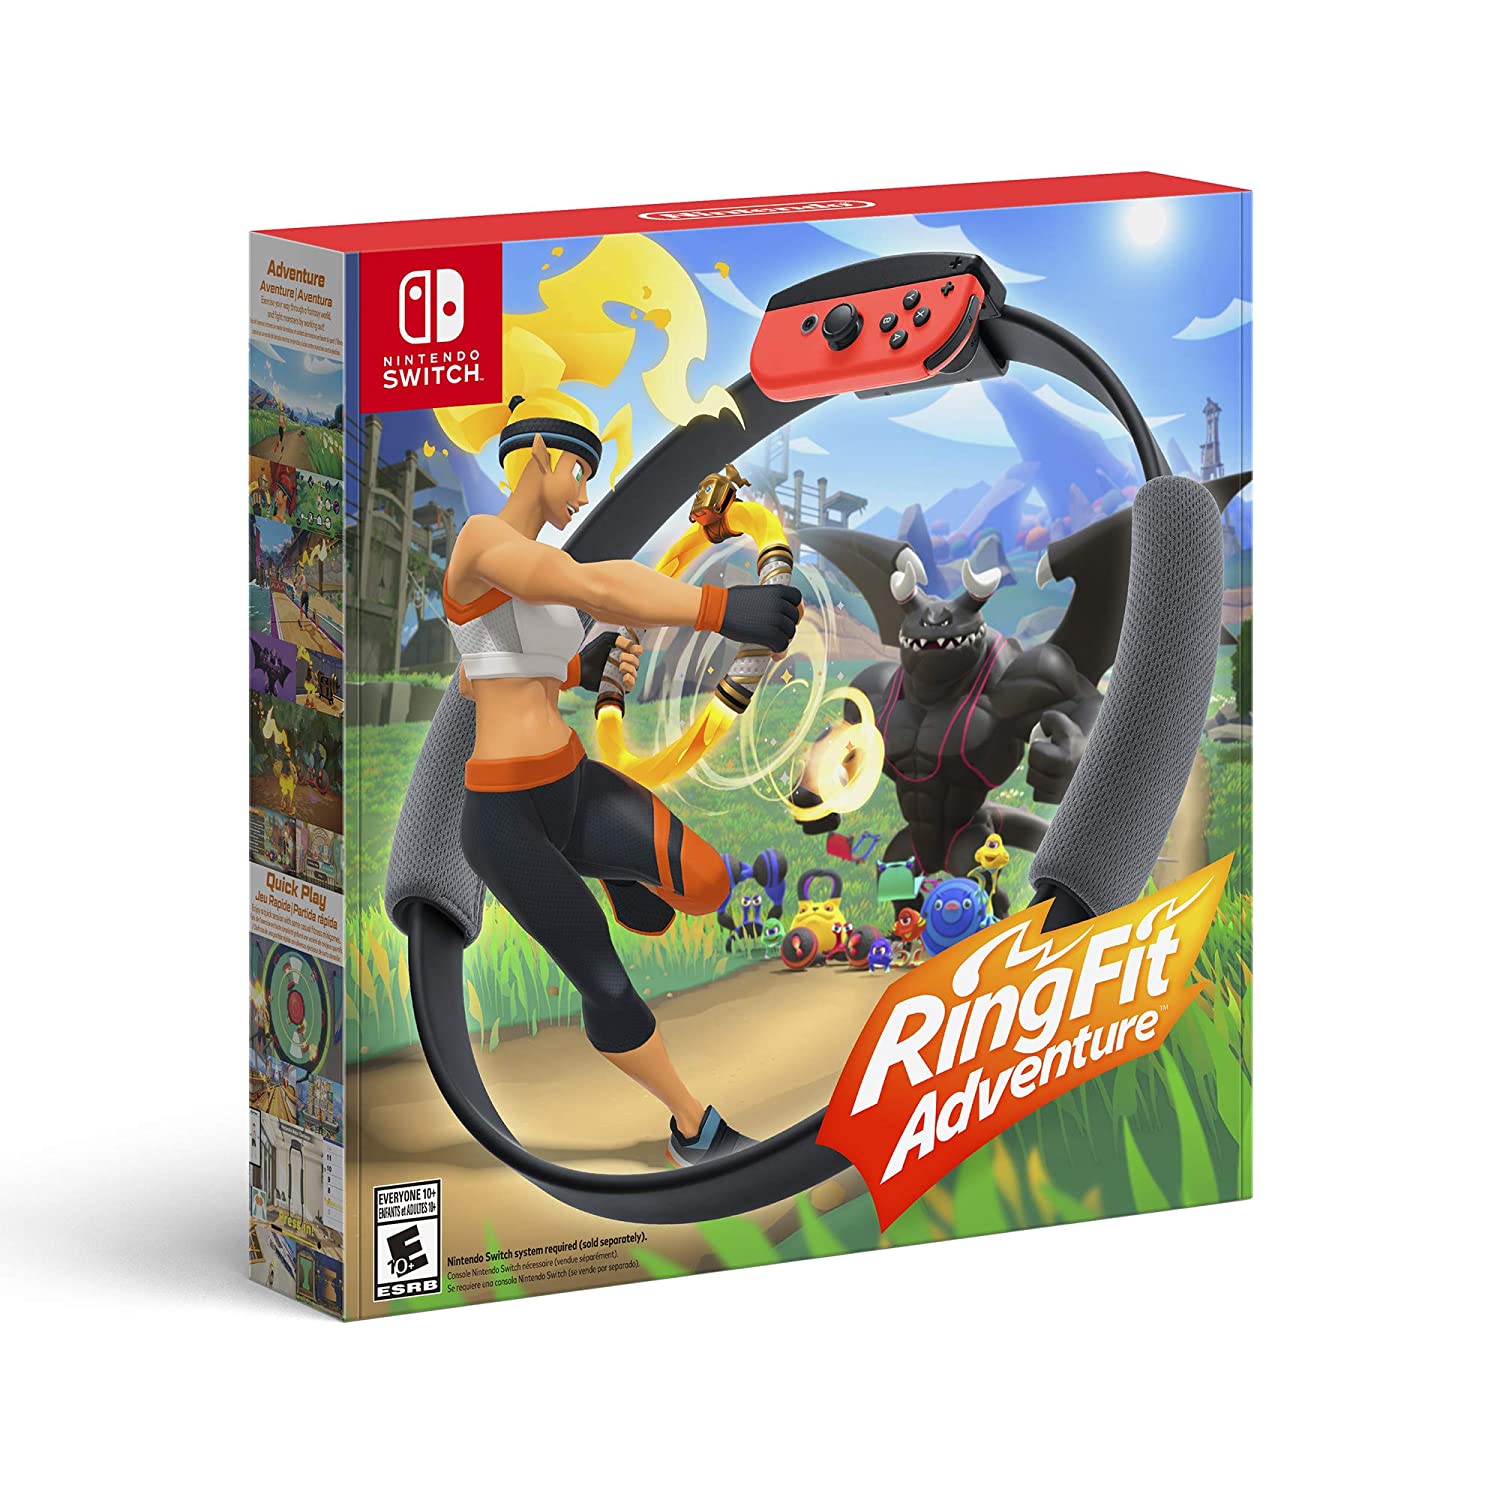 Ring Fit Adventure (Nintendo Switch) $55.99 + Free Shipping